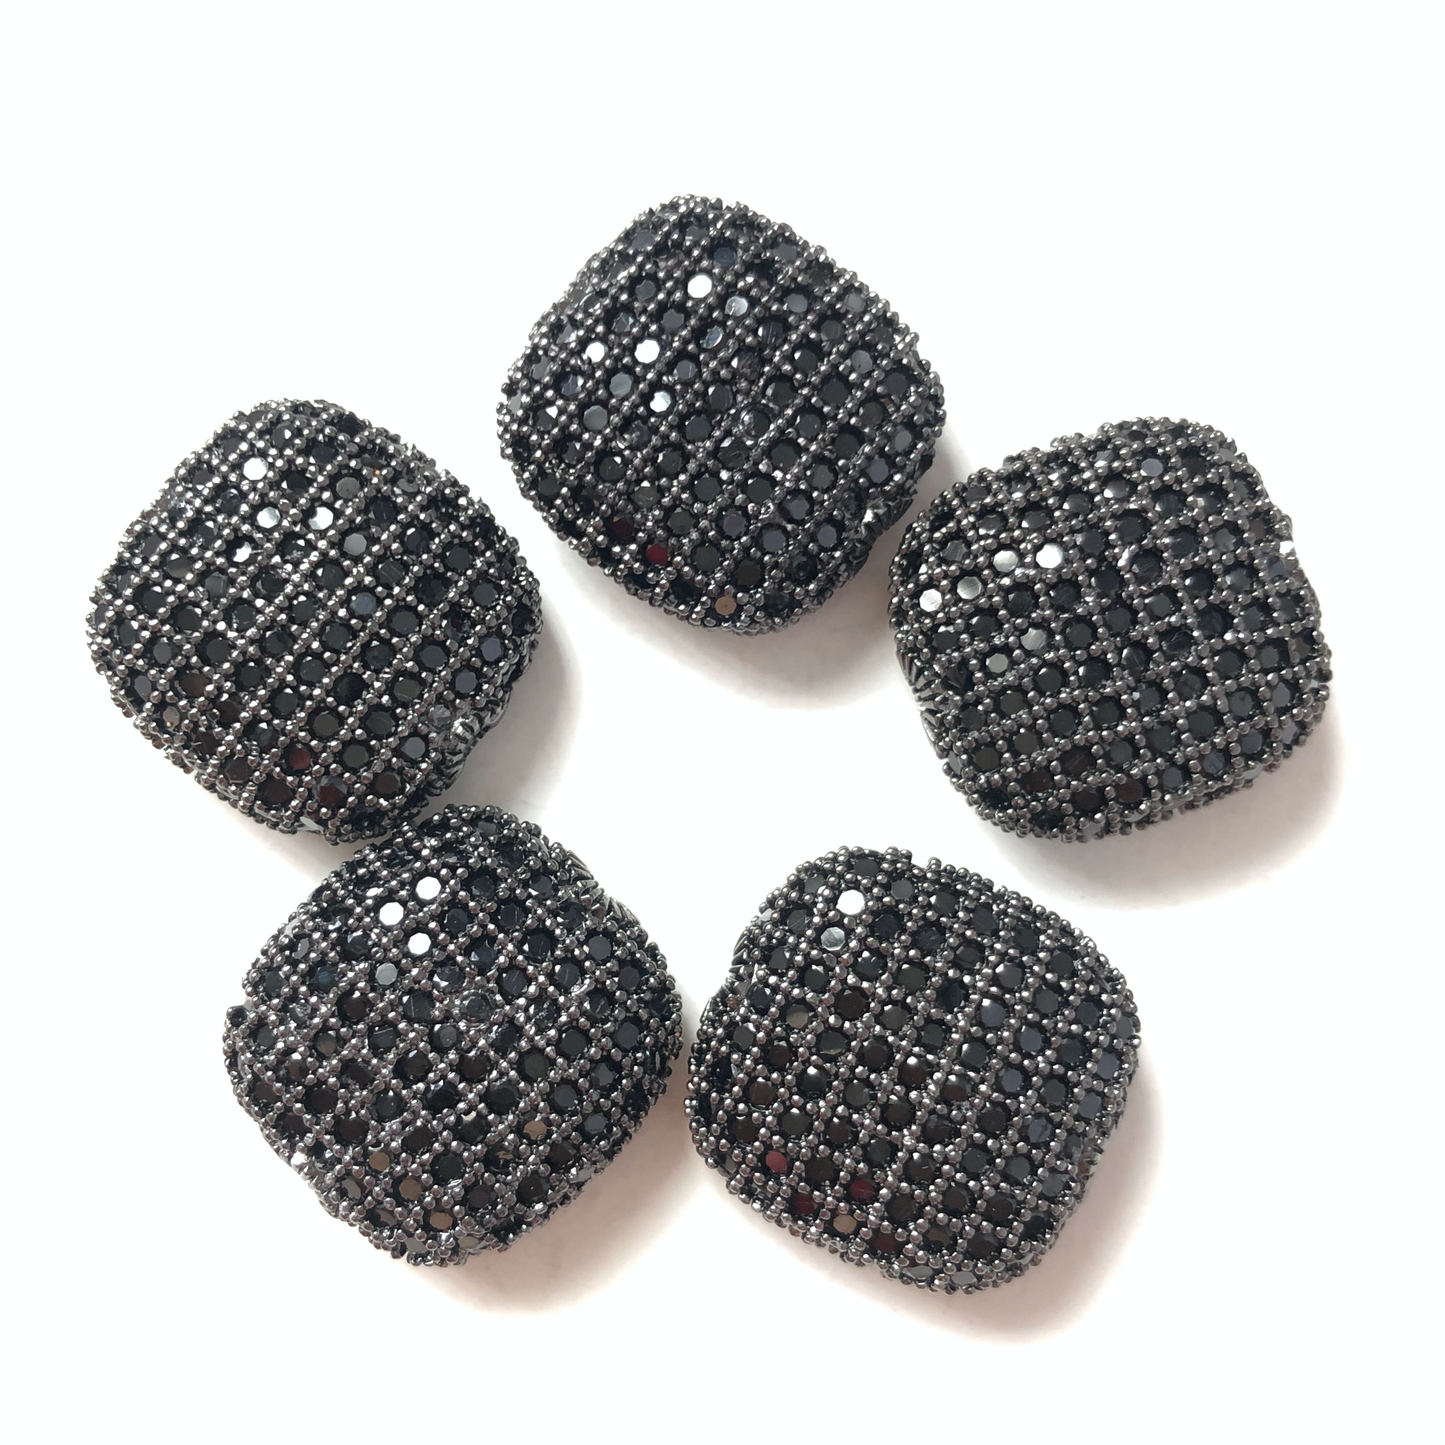 5-10pcs/lot 20*20mm Clear CZ Paved Square Centerpiece Spacers Black on Black CZ Paved Spacers Square Spacers Charms Beads Beyond